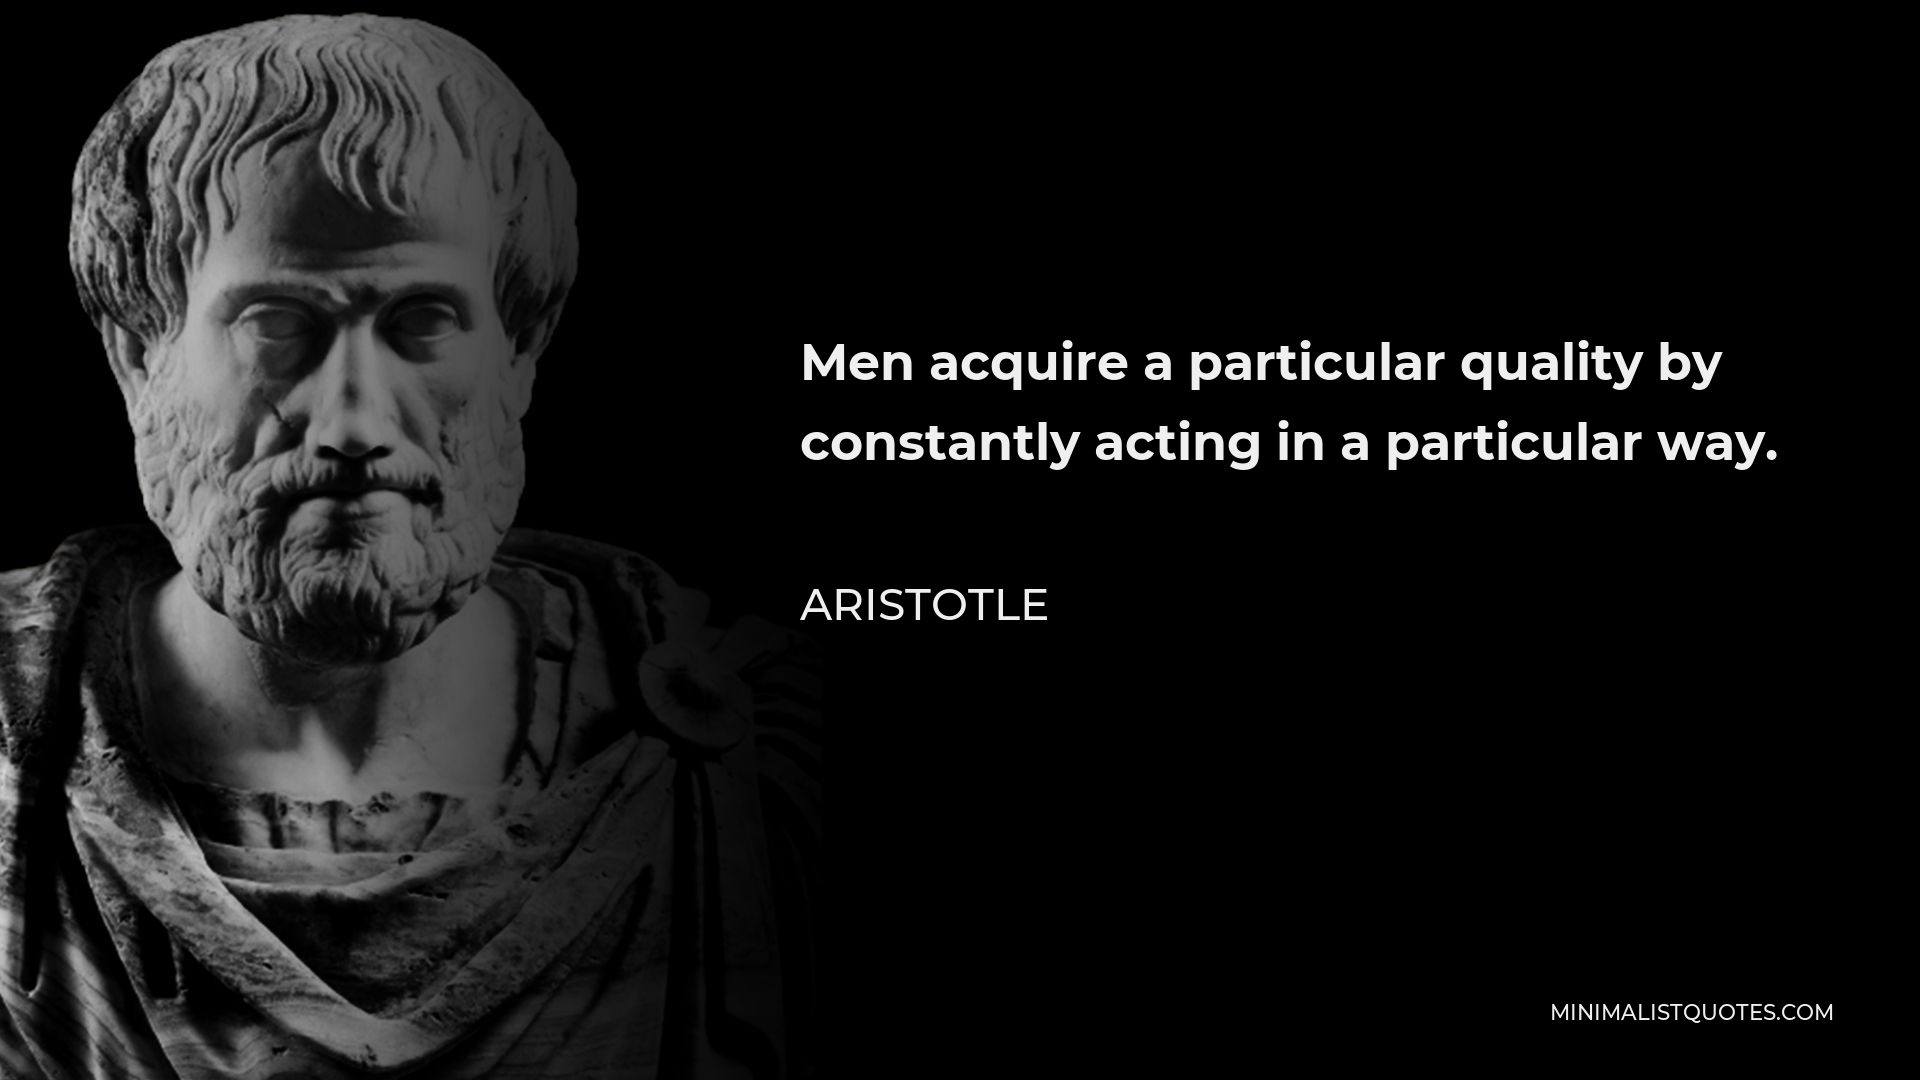 Aristotle Quote - Men acquire a particular quality by constantly acting in a particular way.